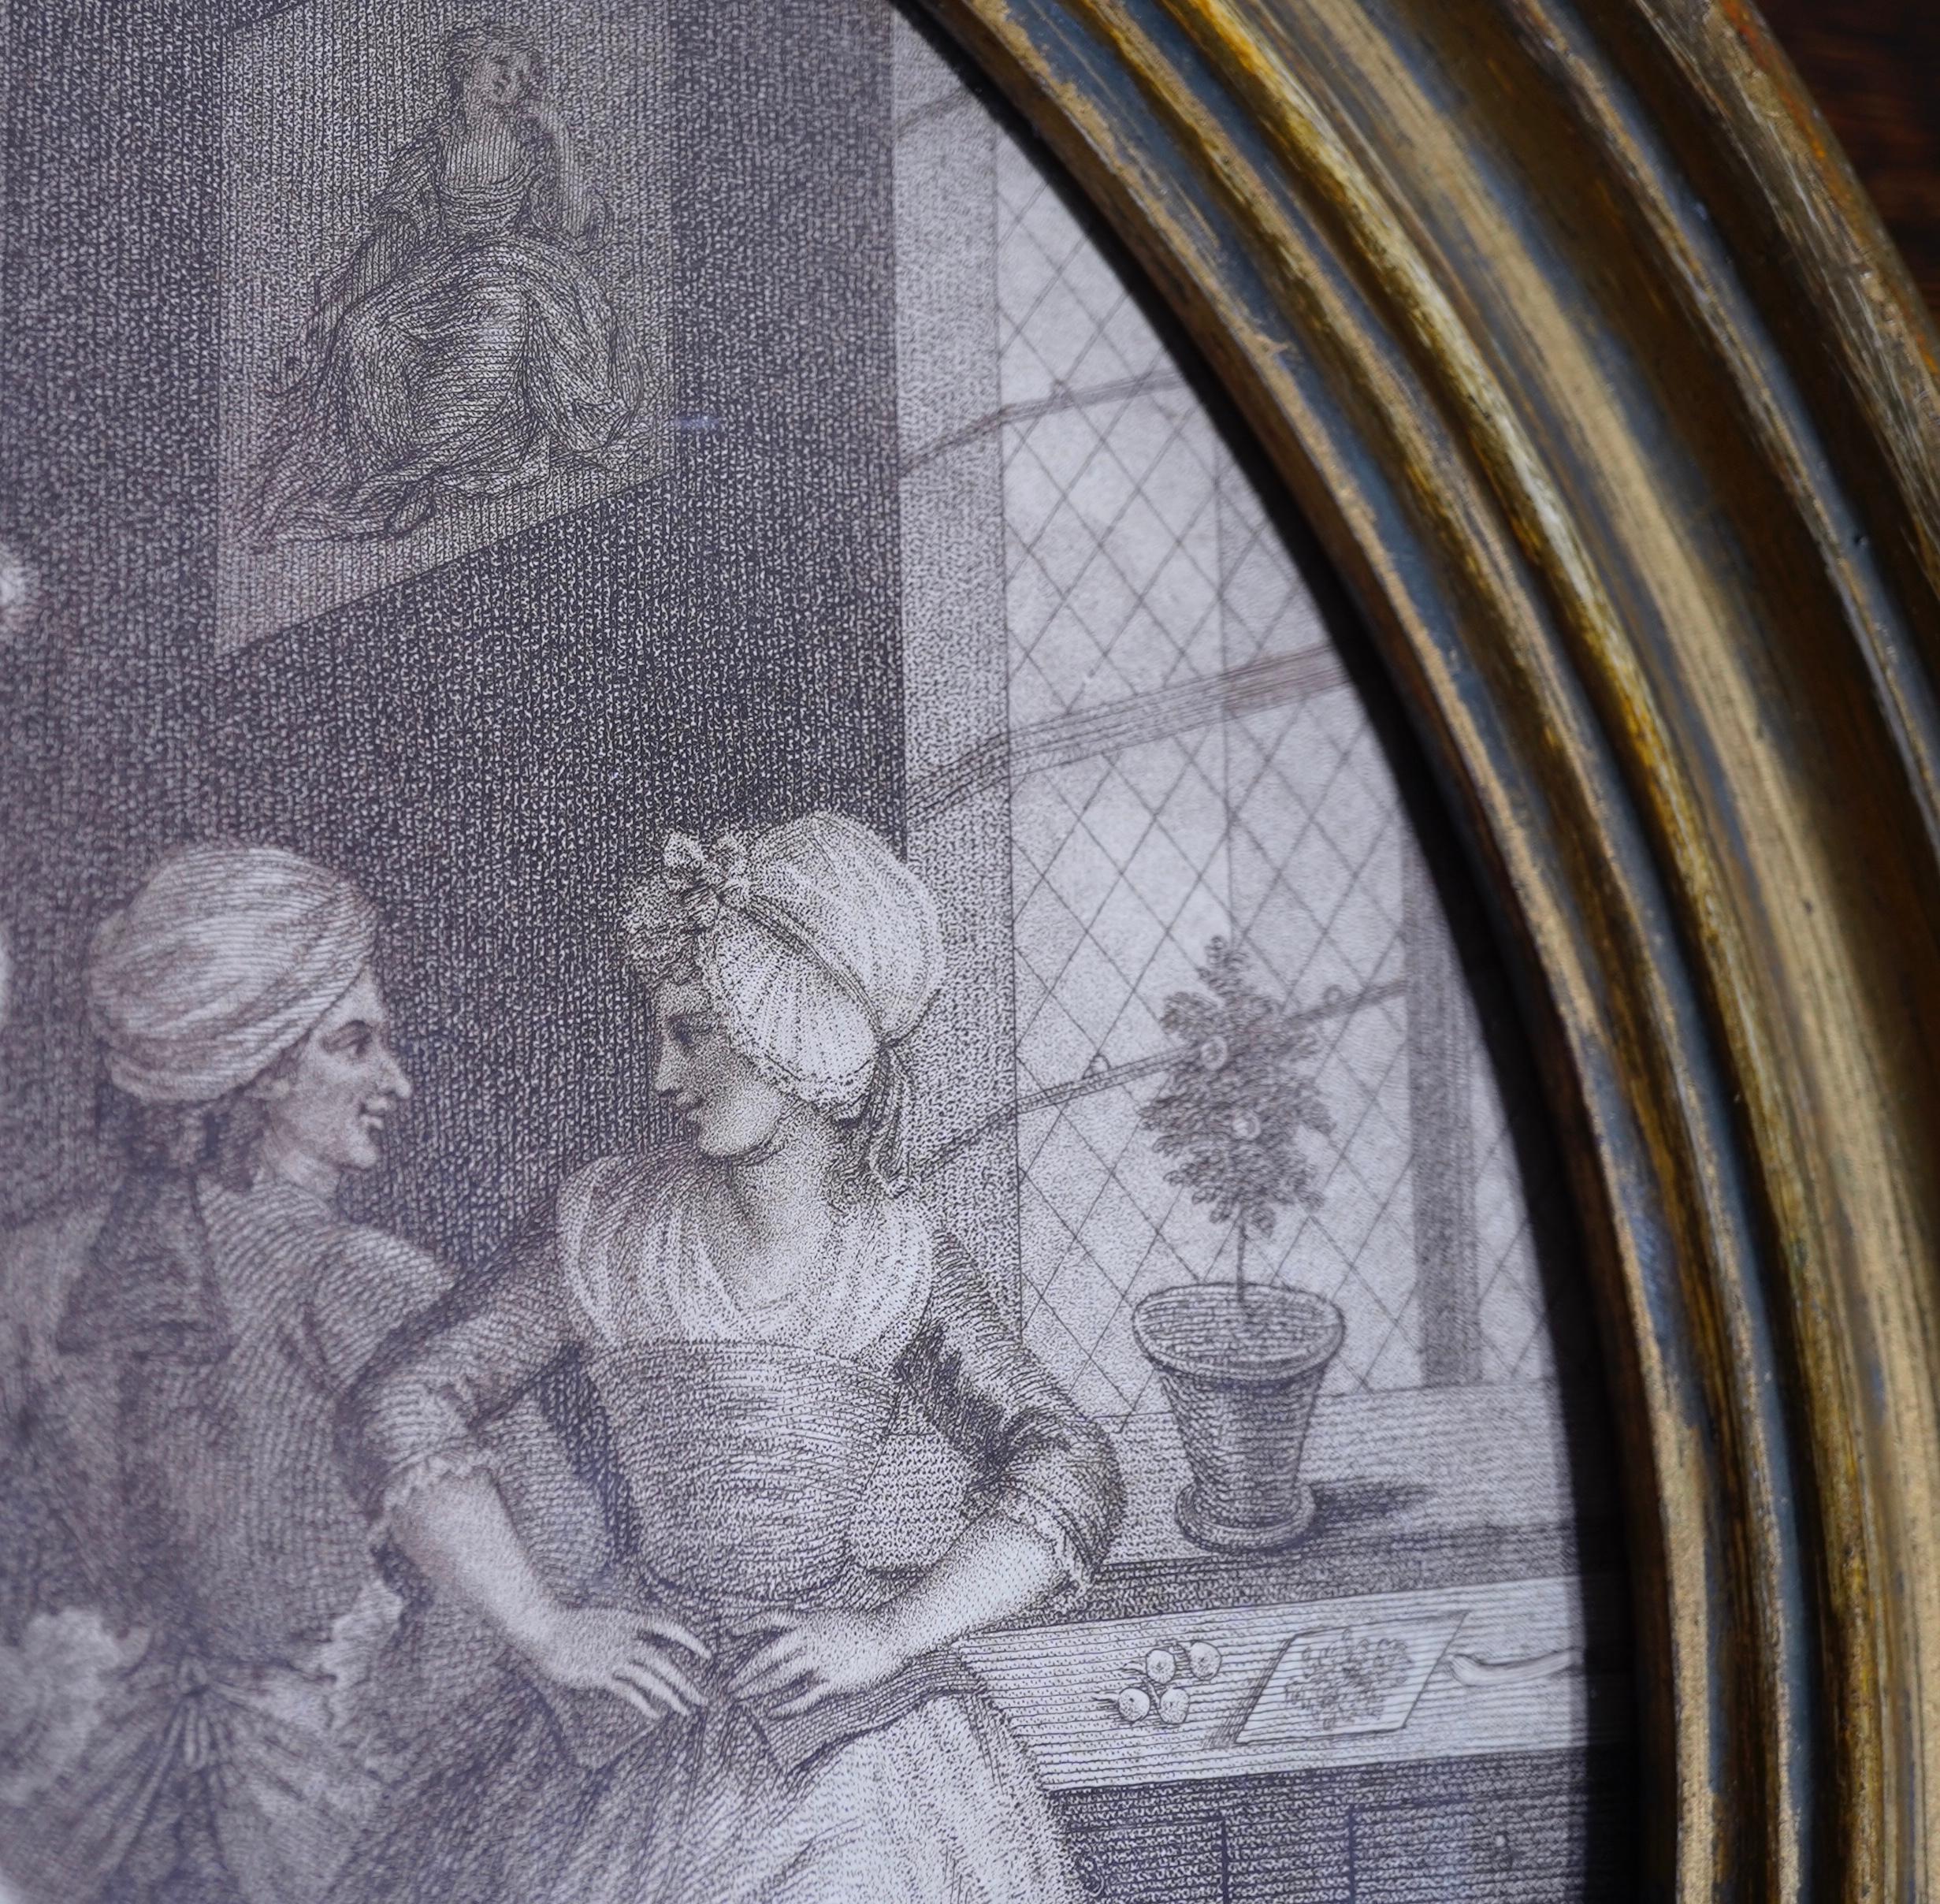 Paper Engraving, Dancing in the Kitchen, circa 1800